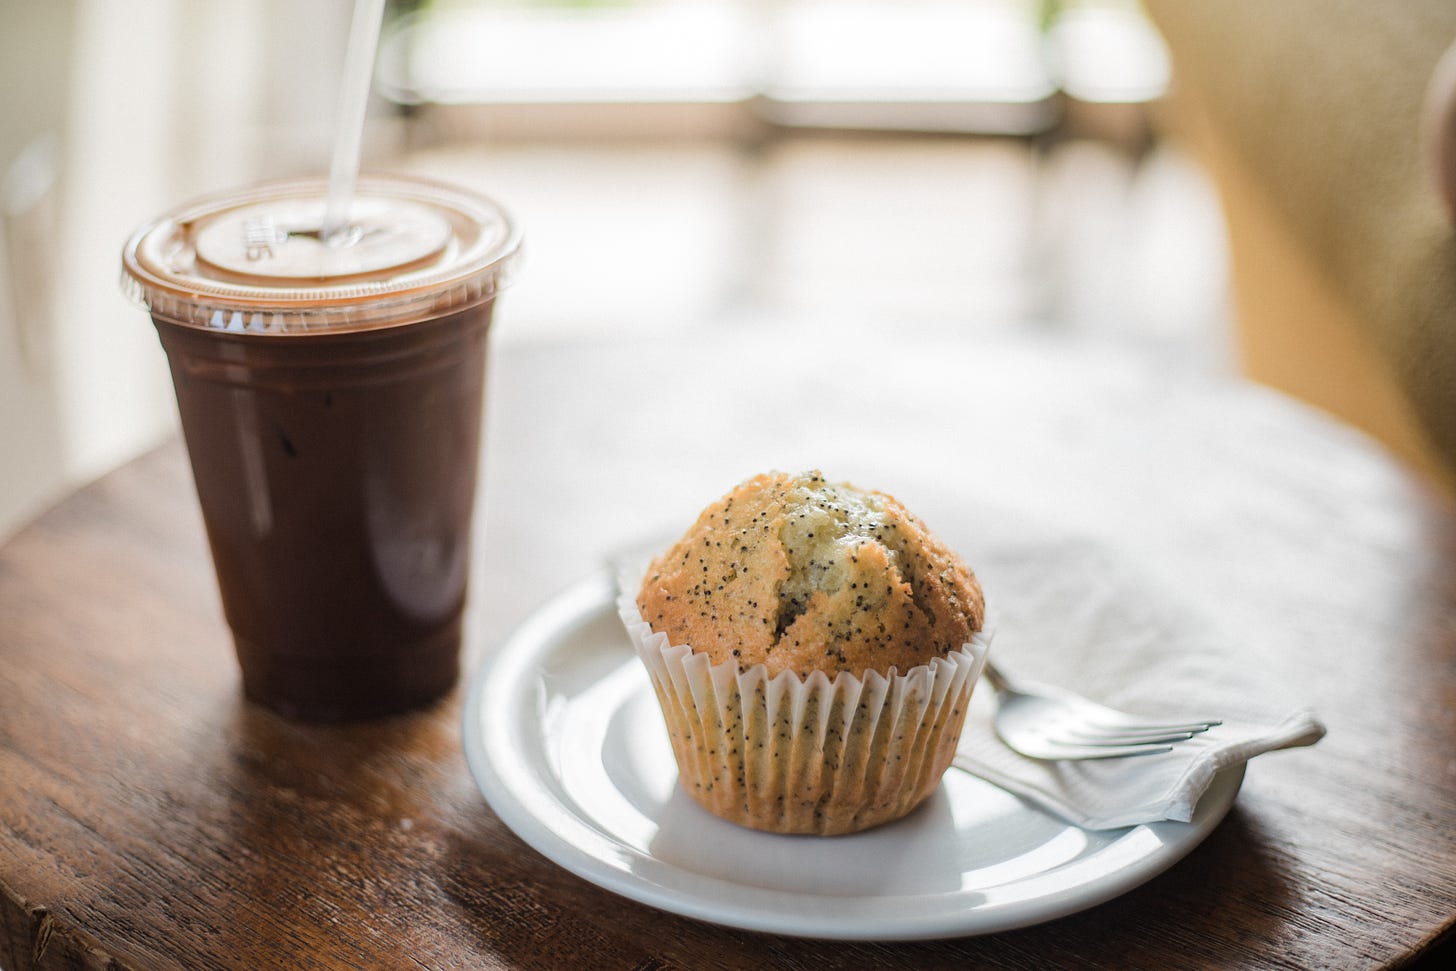 a poppyseed muffin on a plate and a cup of ice coffee